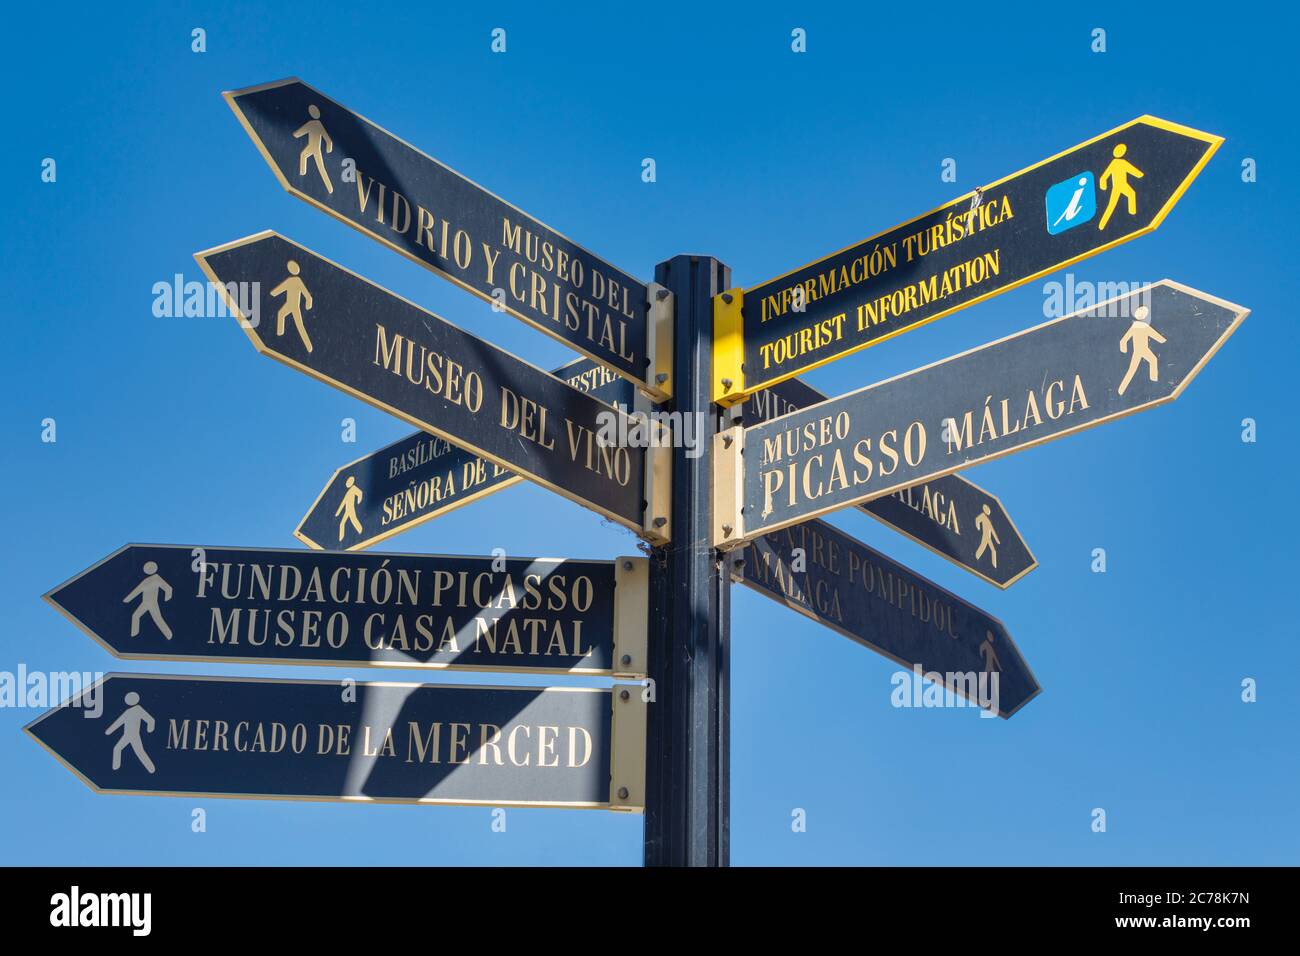 Signs pointing to museums, market and tourist information.  Malaga, Costa del Sol, Malaga Province, Andalusia, southern Spain. Stock Photo